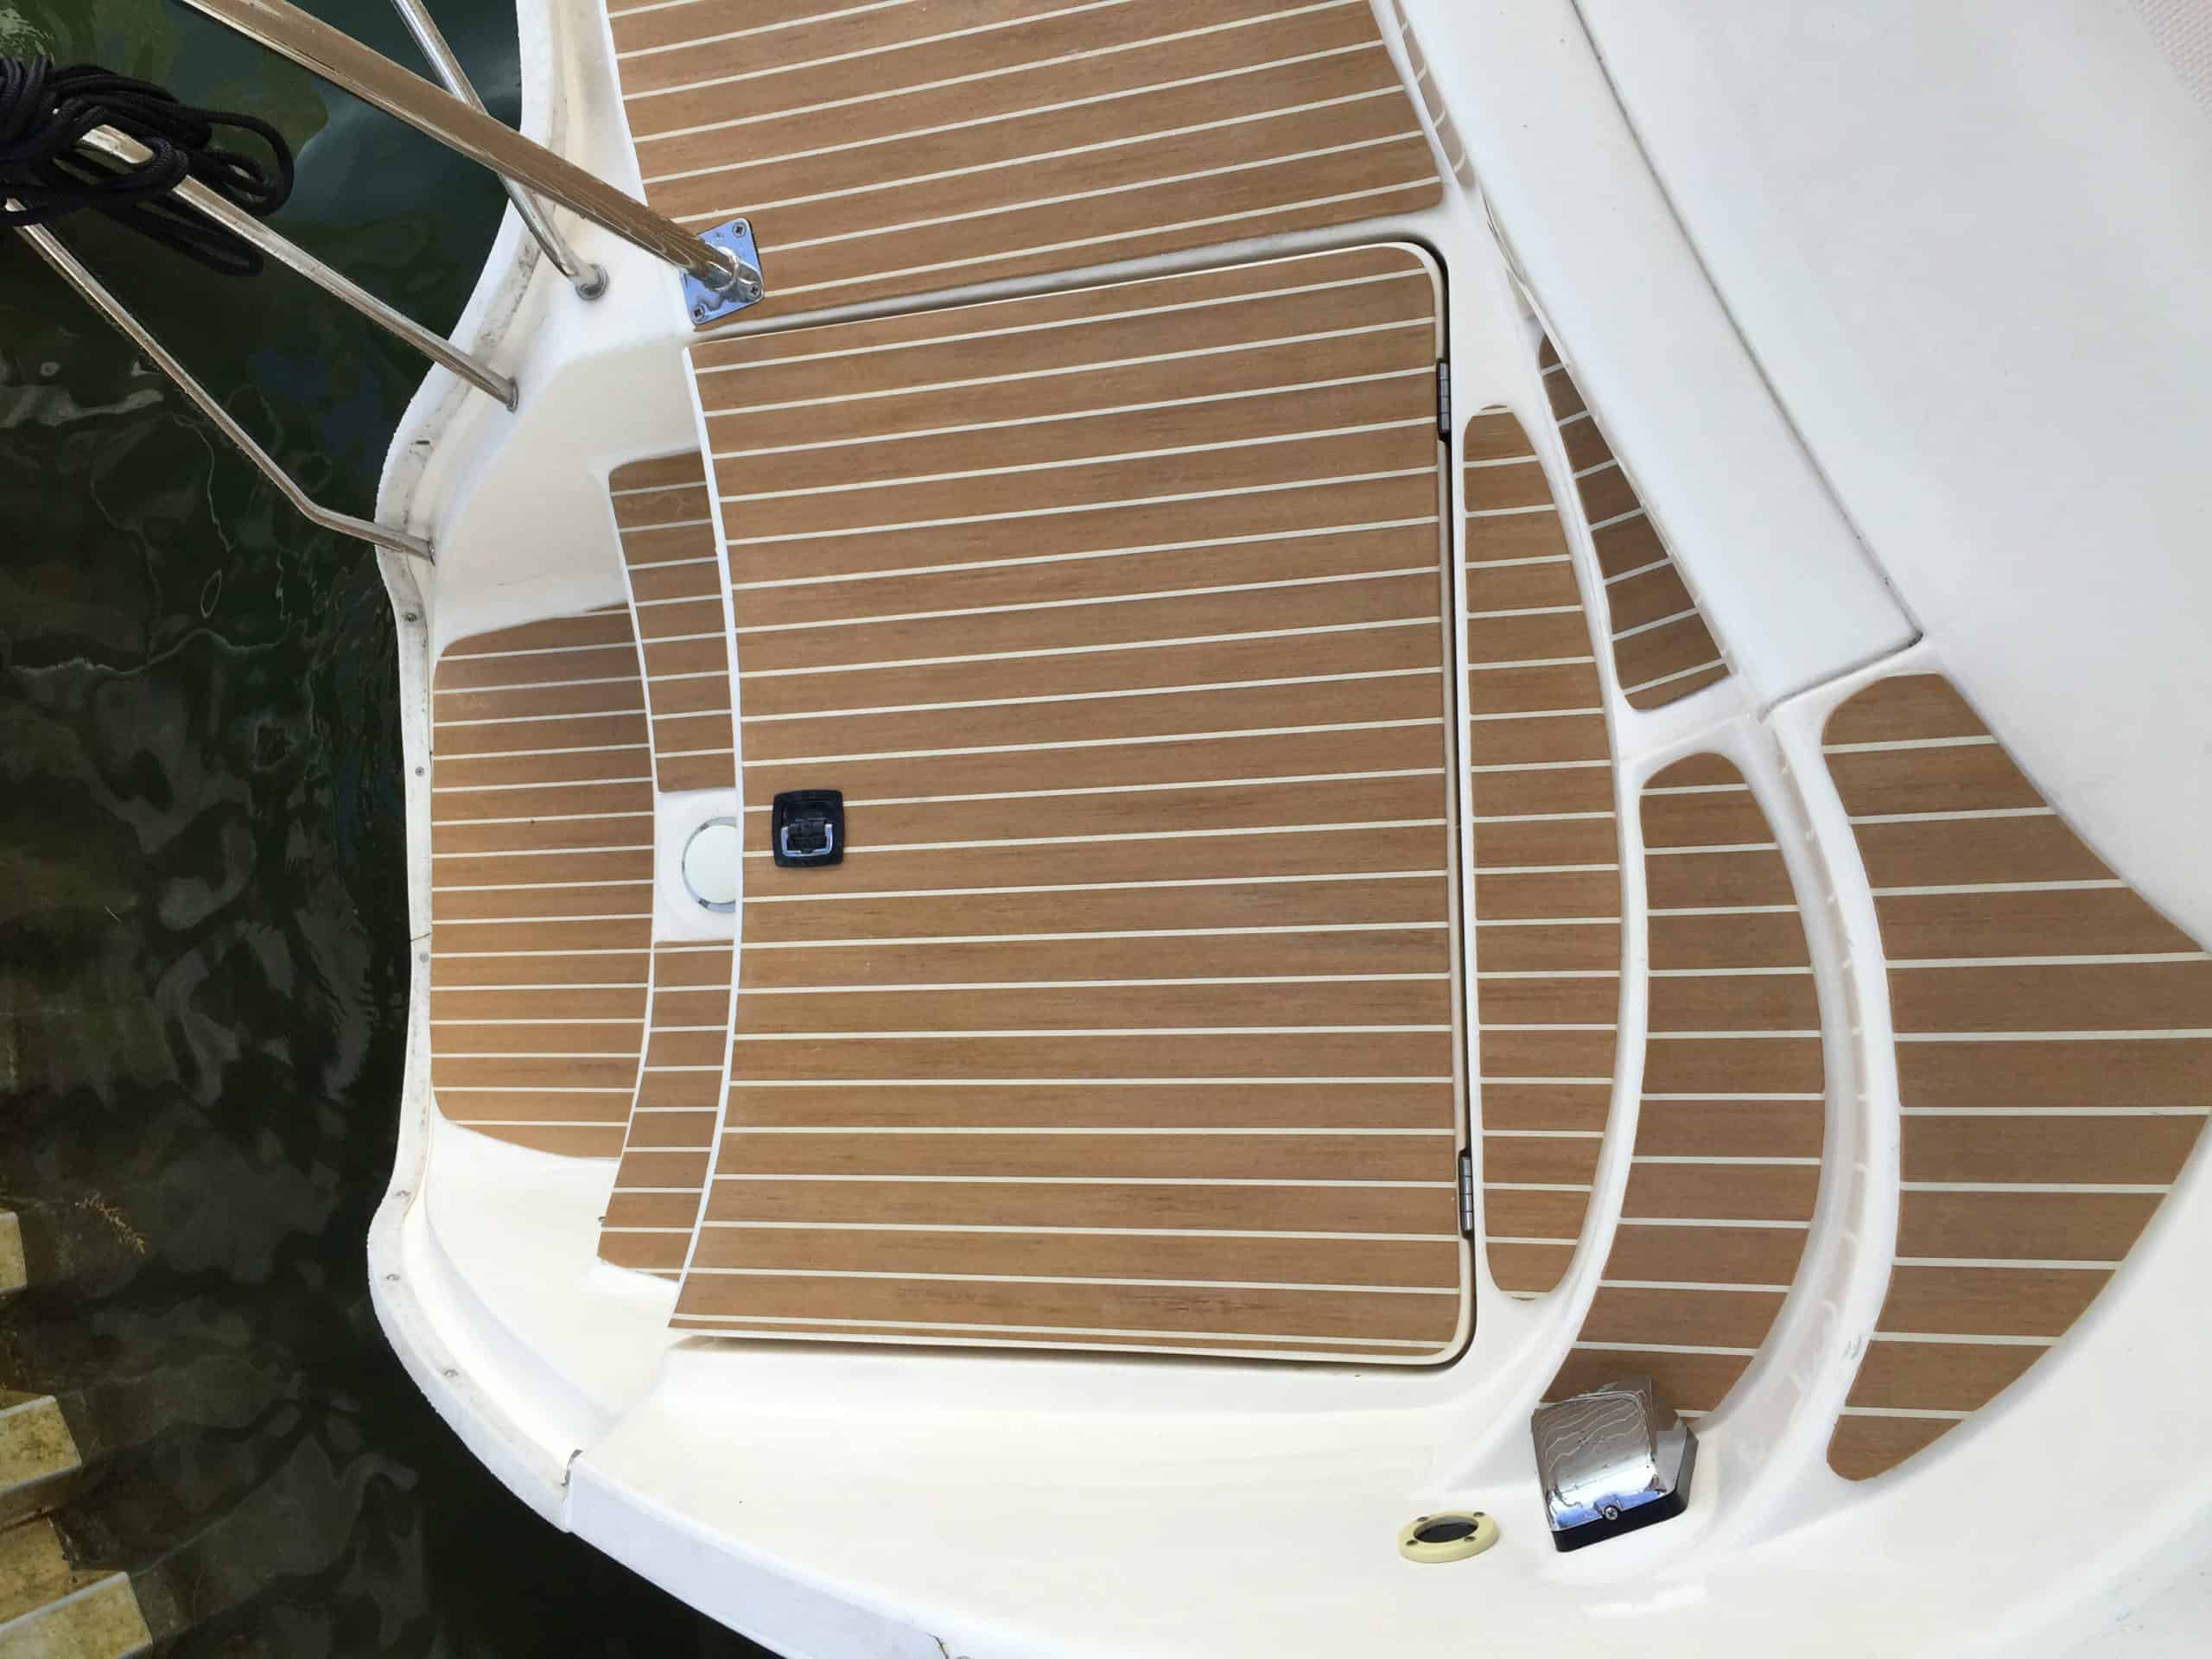 How to choose the right deck design for your boat.